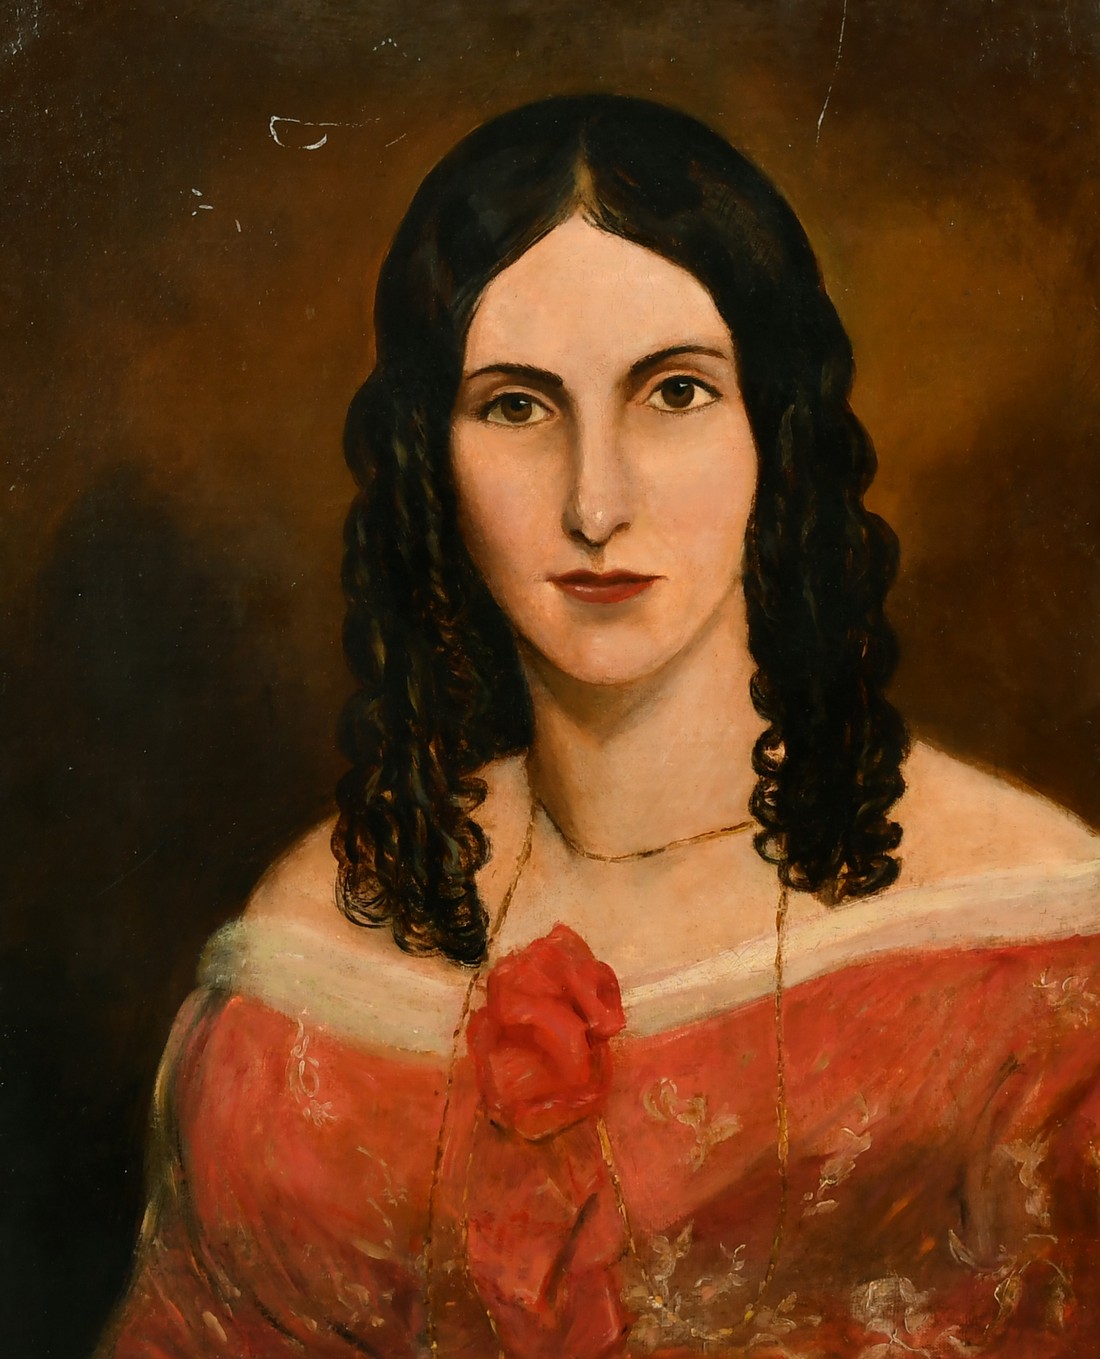 Late 19th Century English School, Portrait of a young lady with ringlets and wearing a red dress,